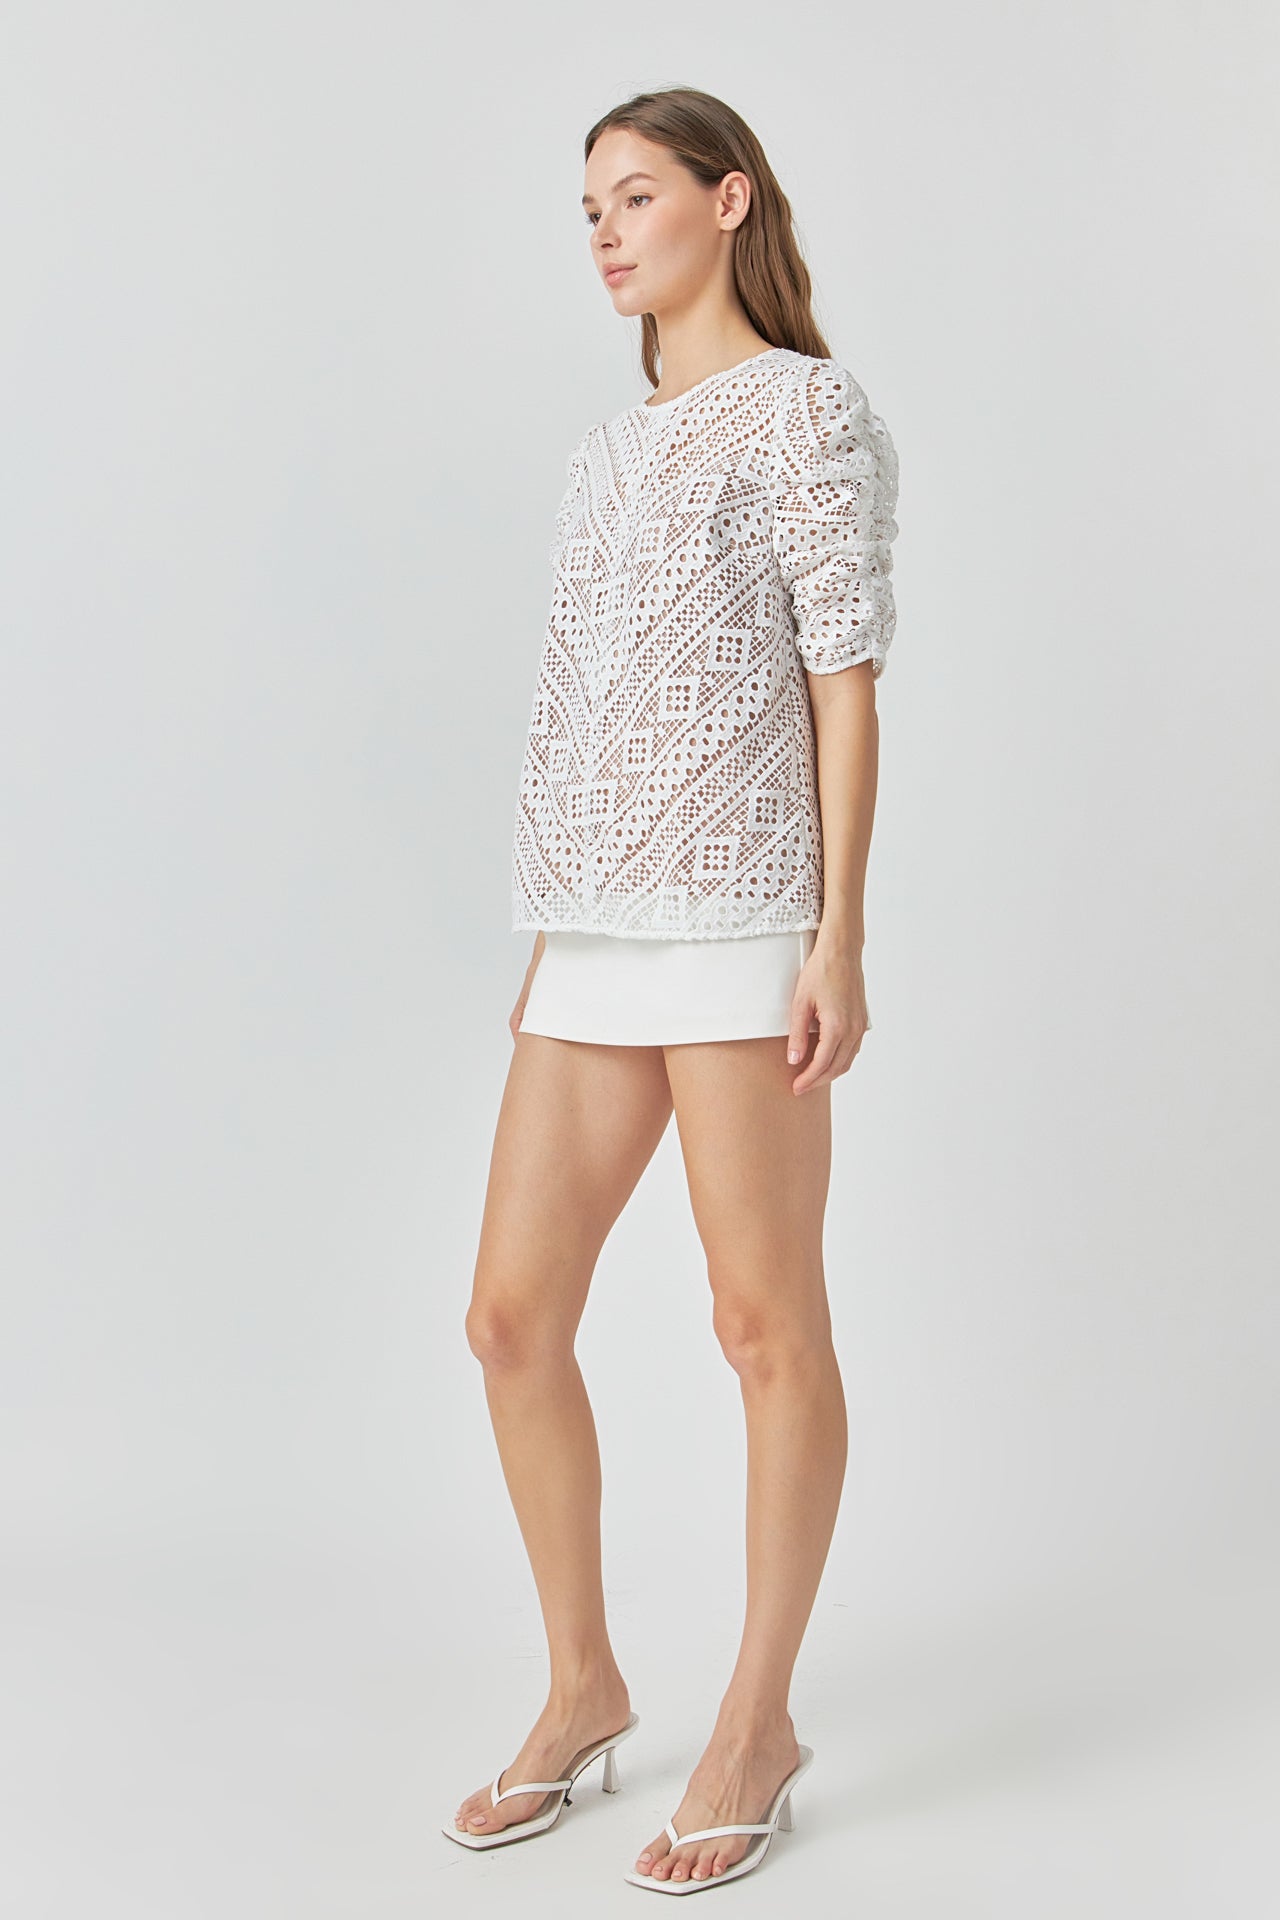 Embroidered Lace Top